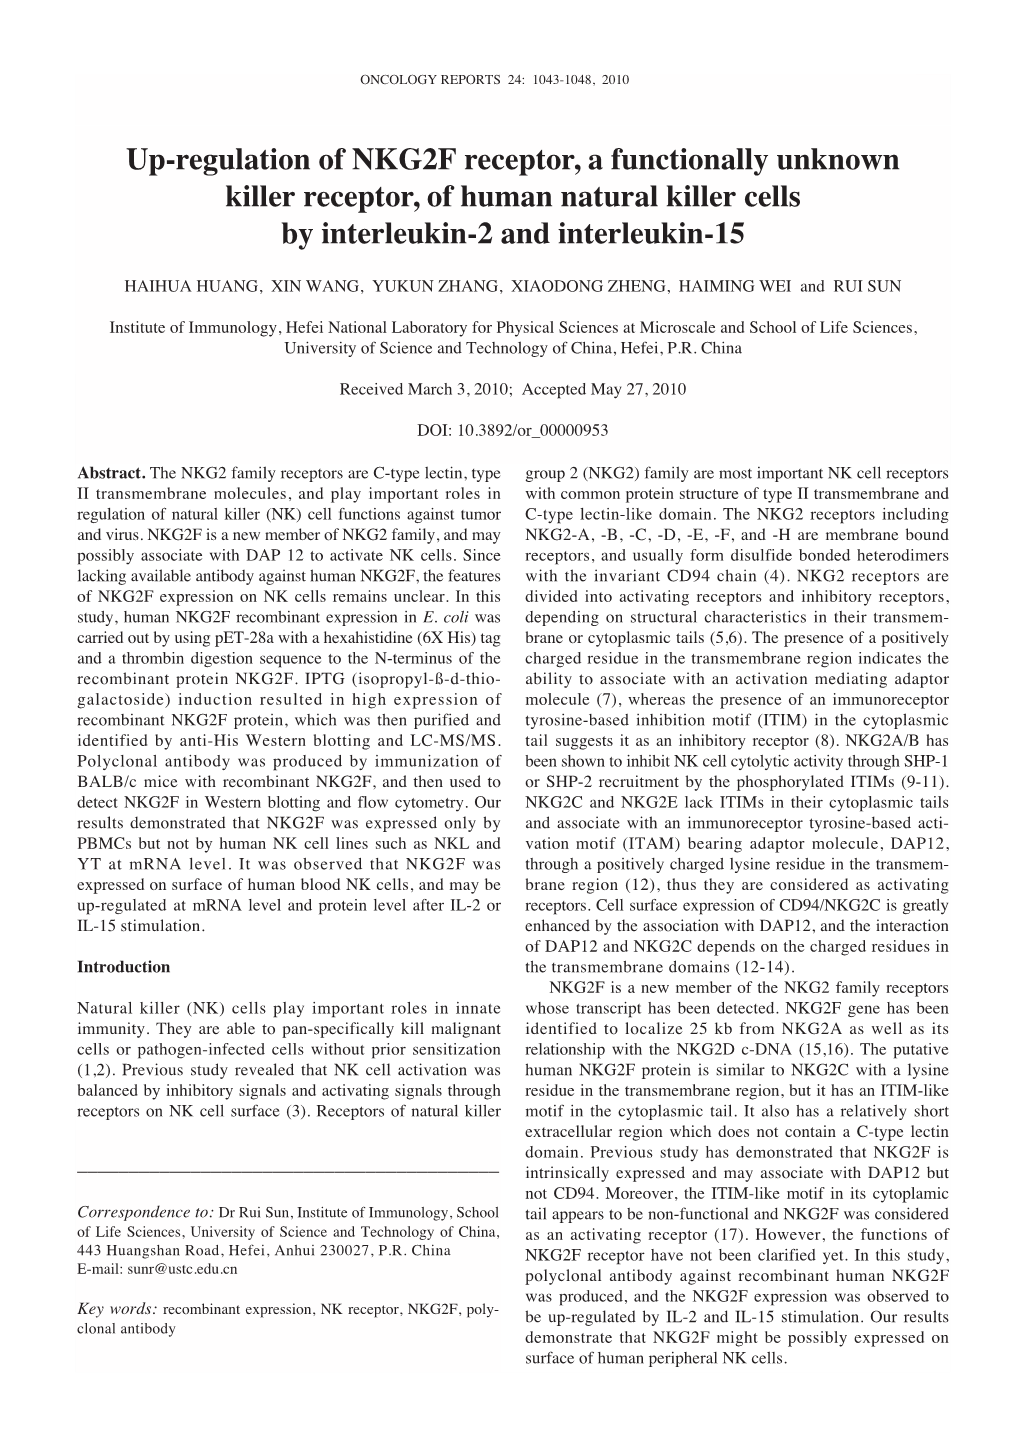 Up-Regulation of NKG2F Receptor, a Functionally Unknown Killer Receptor, of Human Natural Killer Cells by Interleukin-2 and Interleukin-15